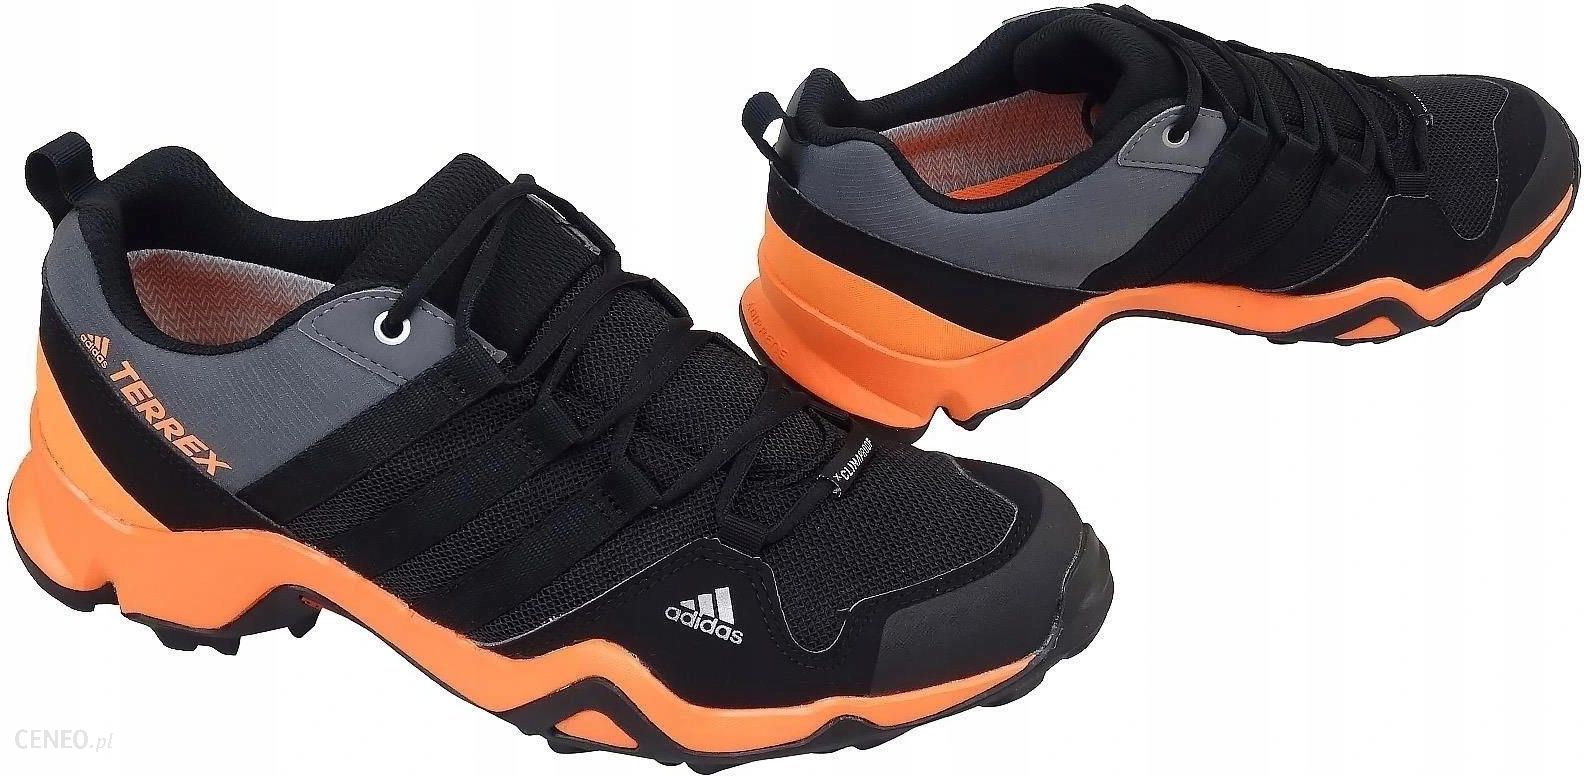 Counting insects Weekdays Measurement Adidas Terrex Ax2R Cp K , Ac7984 , R. 335 - Ceny i opinie - Ceneo.pl